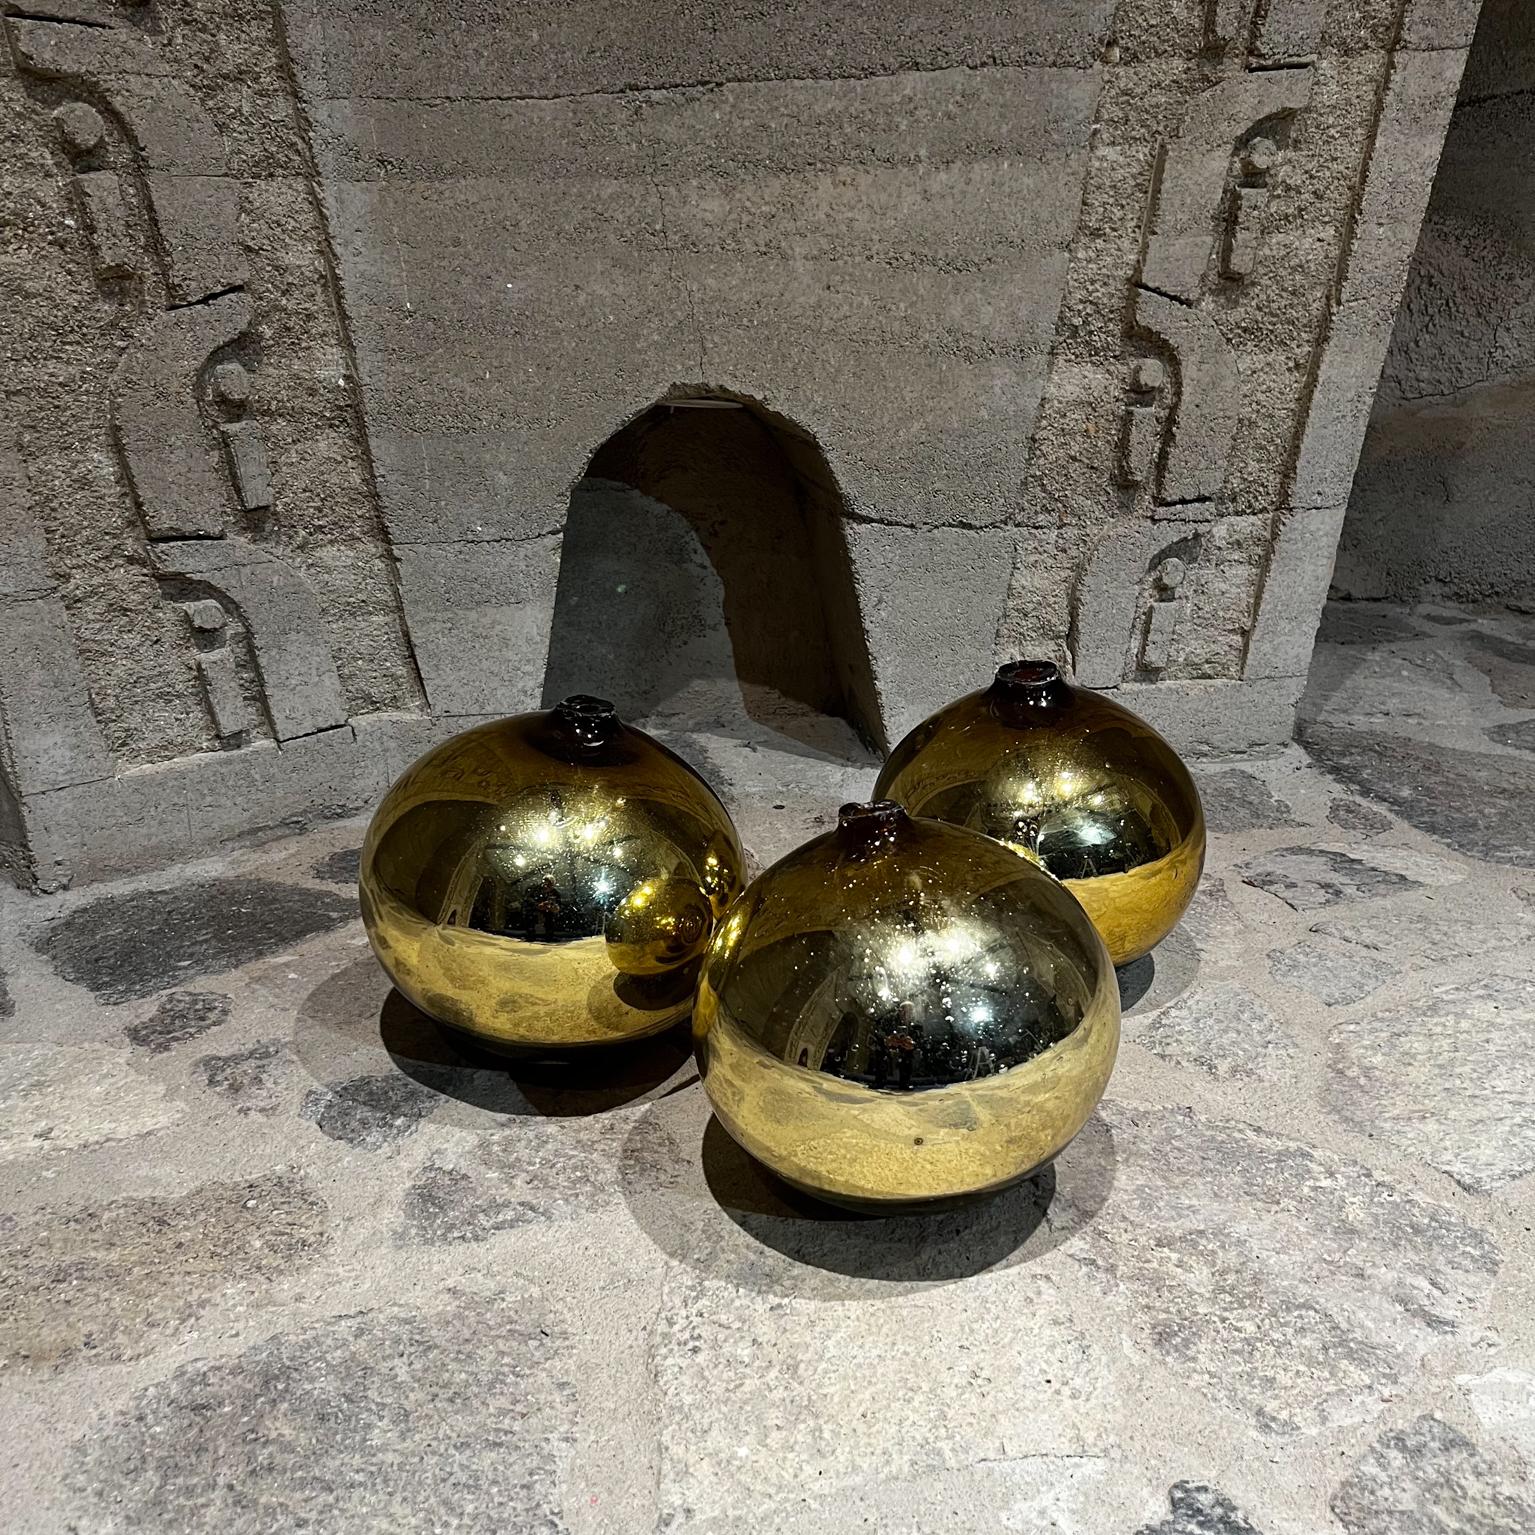 Vintage 1960s Mexico Mercury Glass Three Gold Globes Gazing Ball Spheres
10 tall x Biggest 10 diameter Smaller 9.5 diameter
Set of 3 mercury glass spheres. 
Crafted in Handblown glass.
No stamp or label present from the maker.
Inspired by